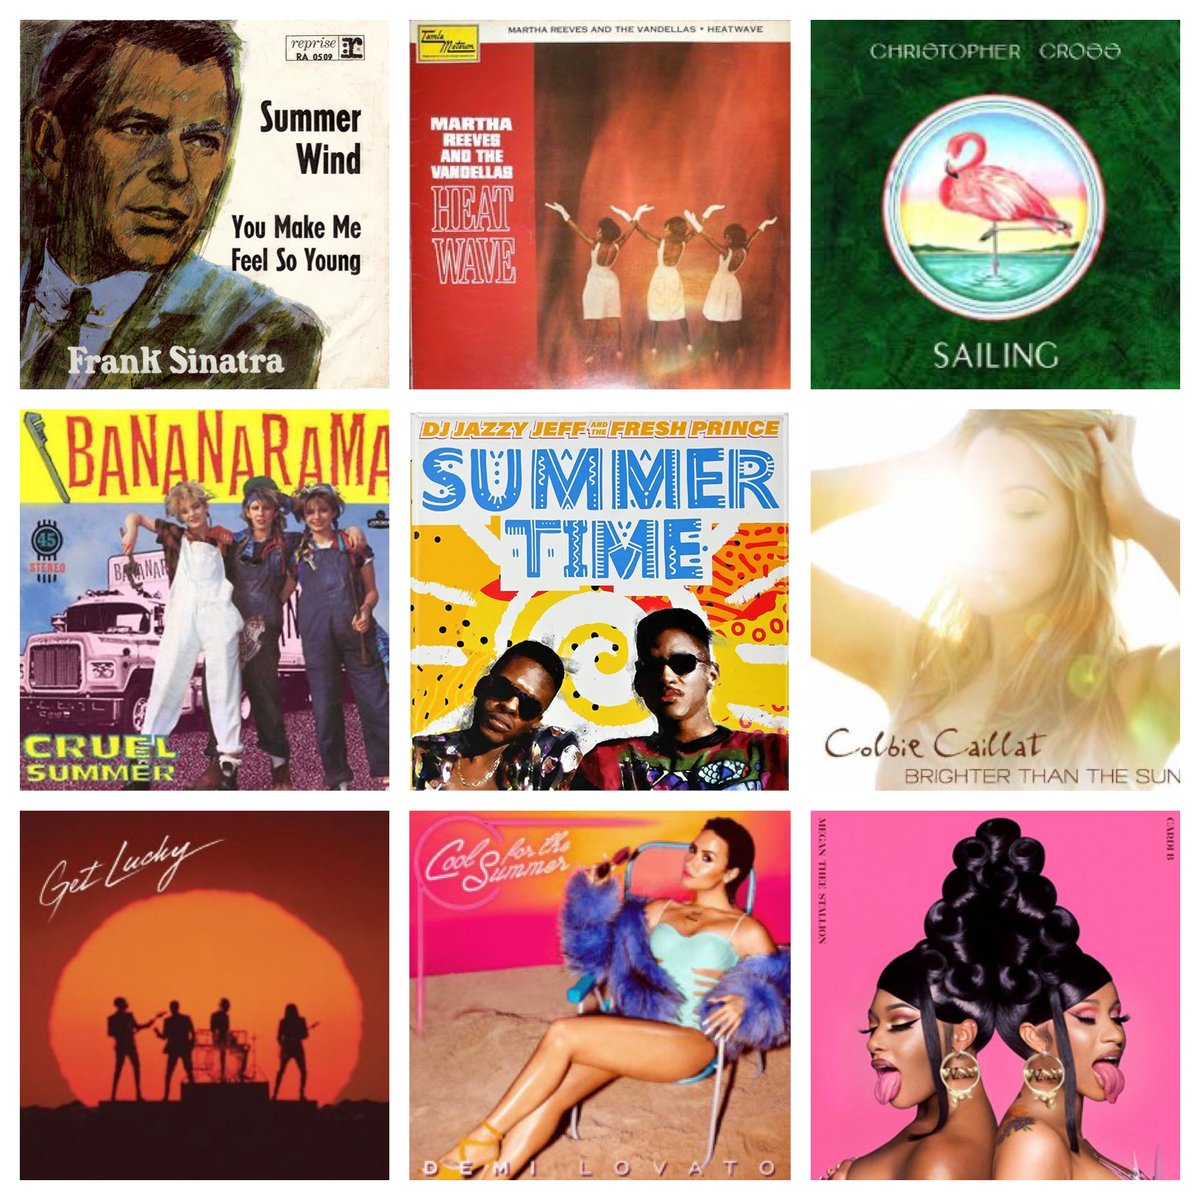 POLL TIME! It's a dreary, cold day in the Northeast, which has us dreaming of summer. Take our Best 'Summer' Song poll and pick your favorite songs either ABOUT summer, or which were popular DURING the summer:

greatpopculturedebate.com/poll-best-summ…

#summer #summervibes #music #musicpoll